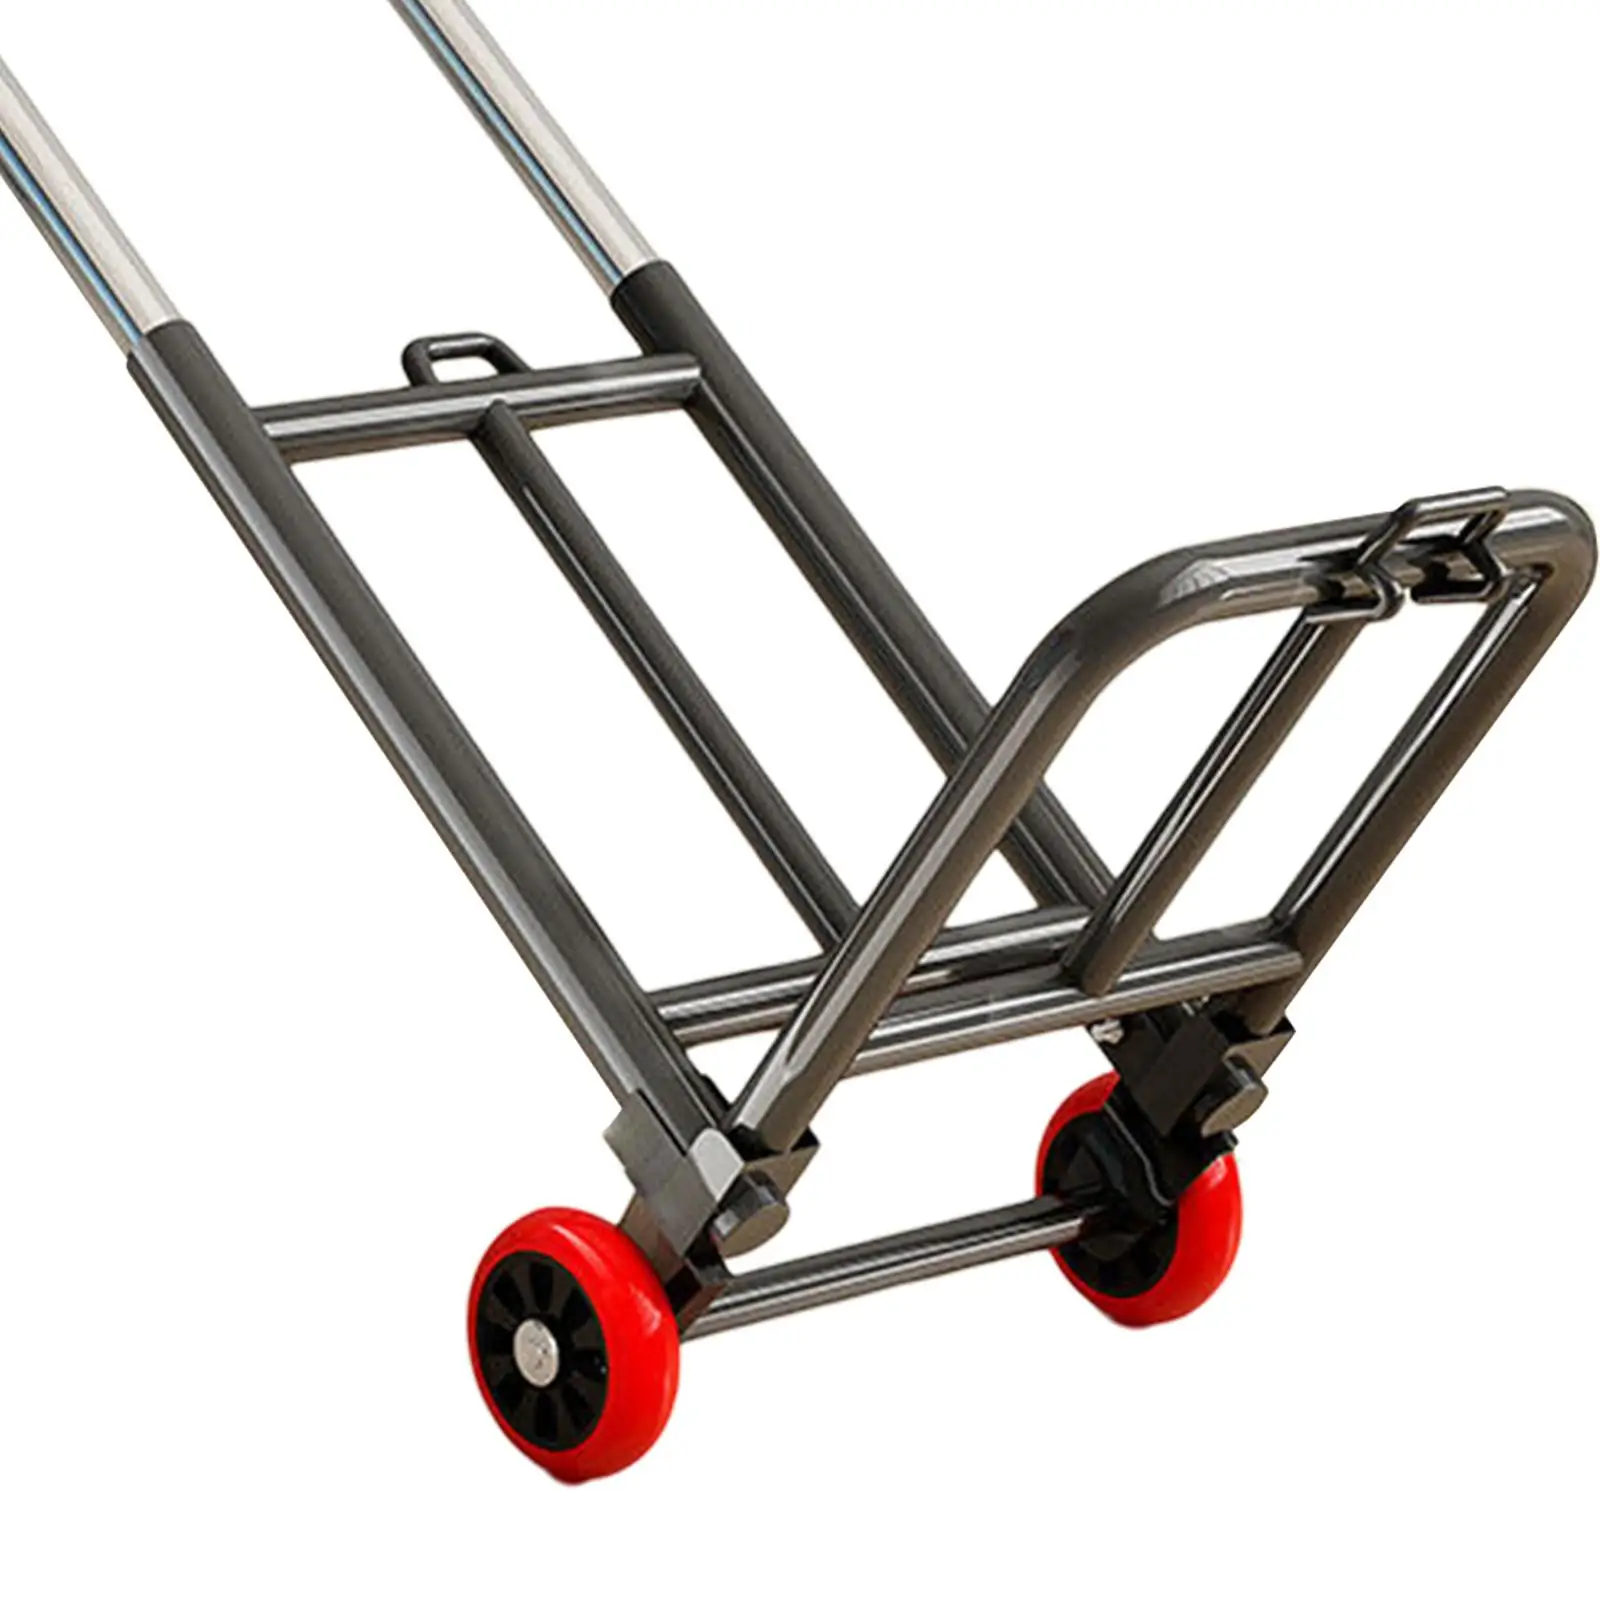 Folding Hand Truck Adjustable Foldable with wheels Shopping Cart Foldable Hand Cart for Airport Transportation Moving Shopping